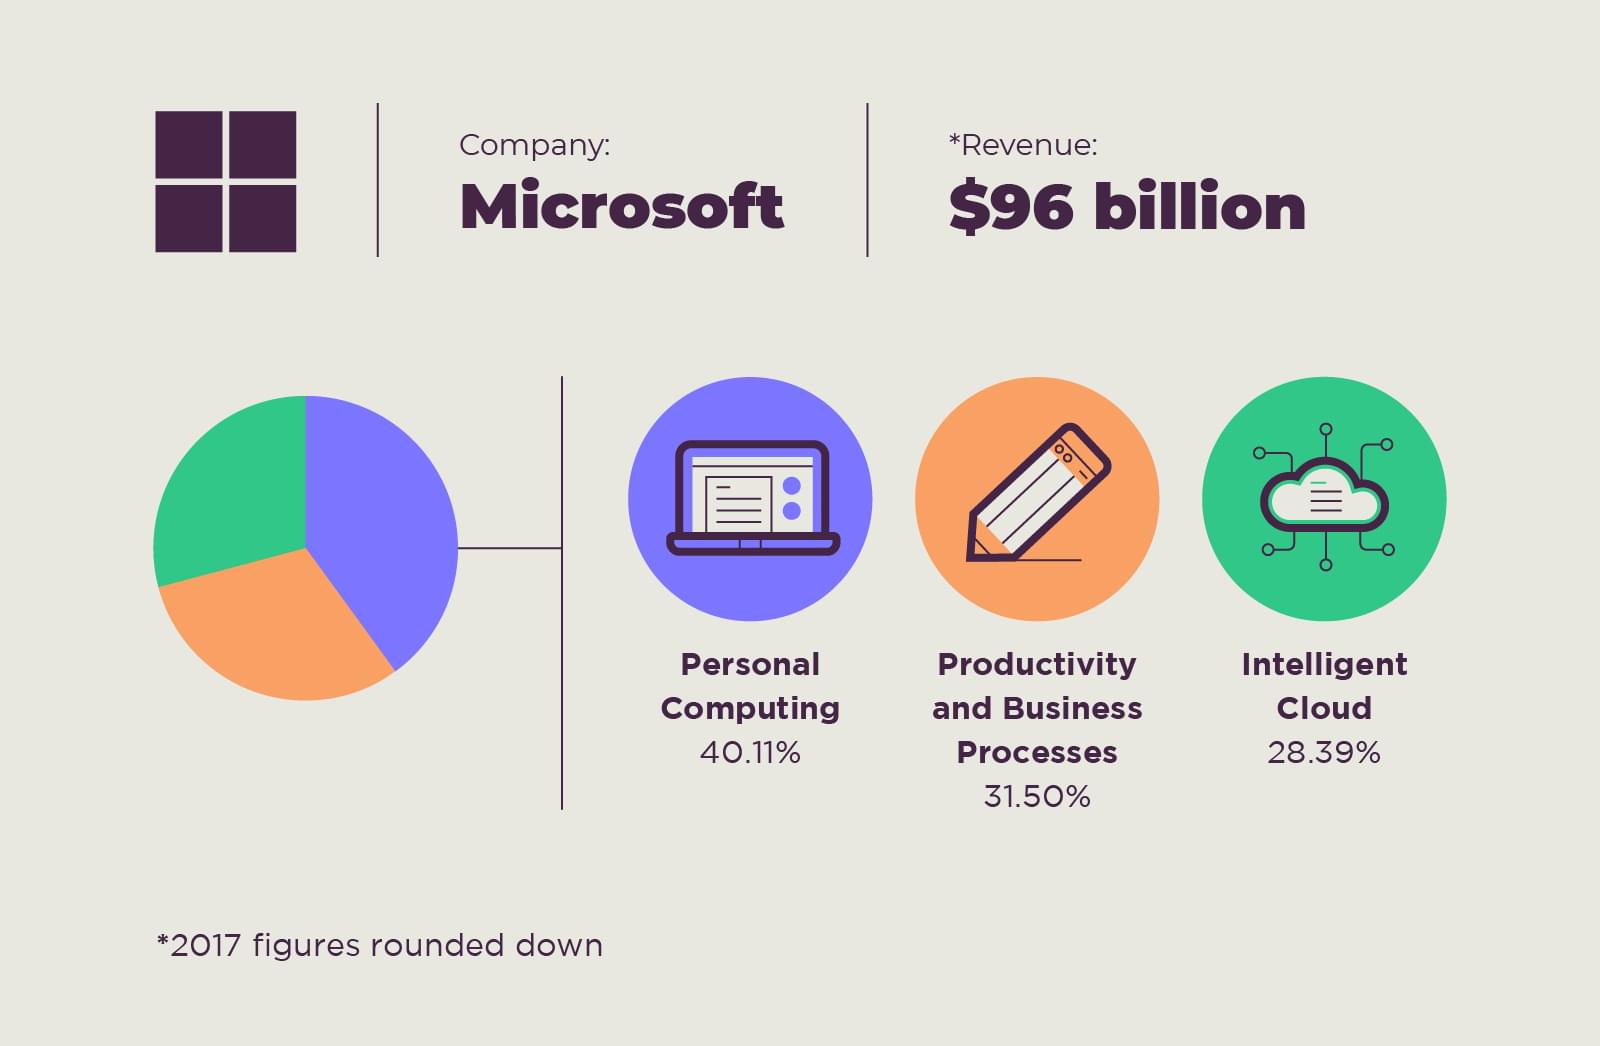 The personal computing software giant microsoft has changed the business model substantially